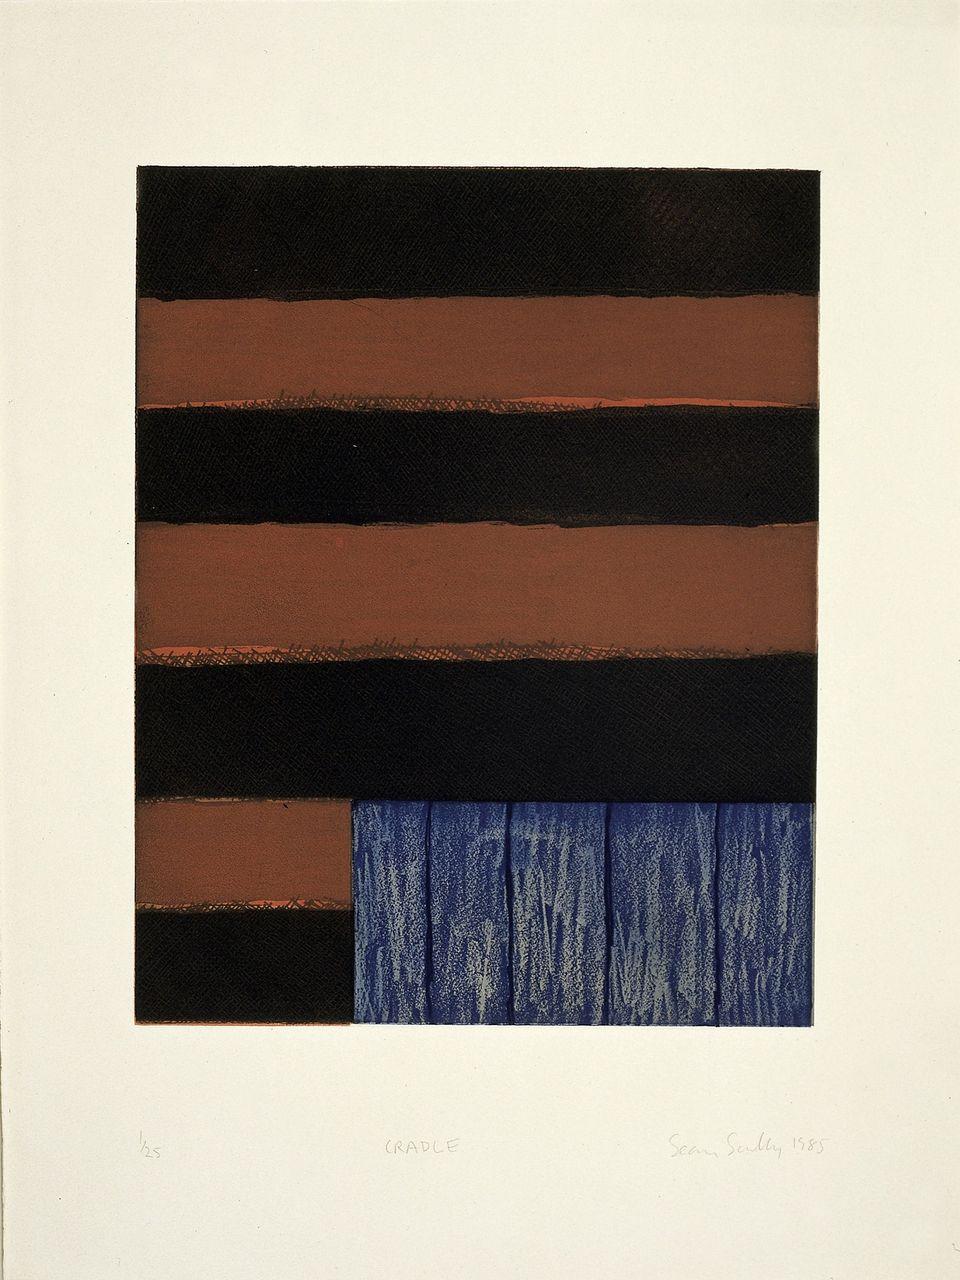 Cradle - Print by Sean Scully